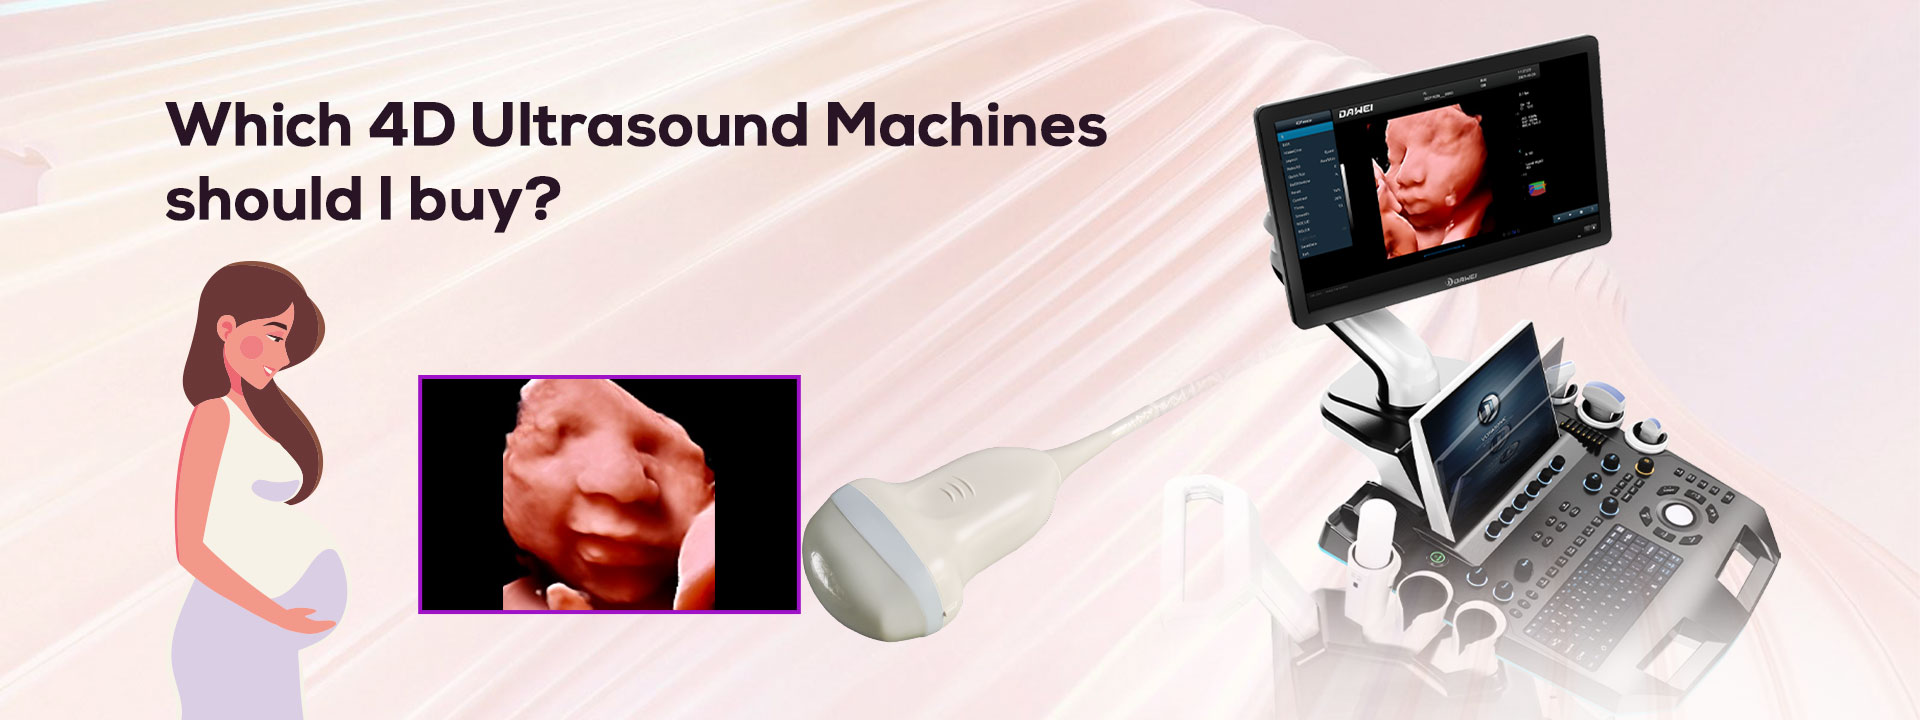 Which 4D Ultrasound Machines should I buy?